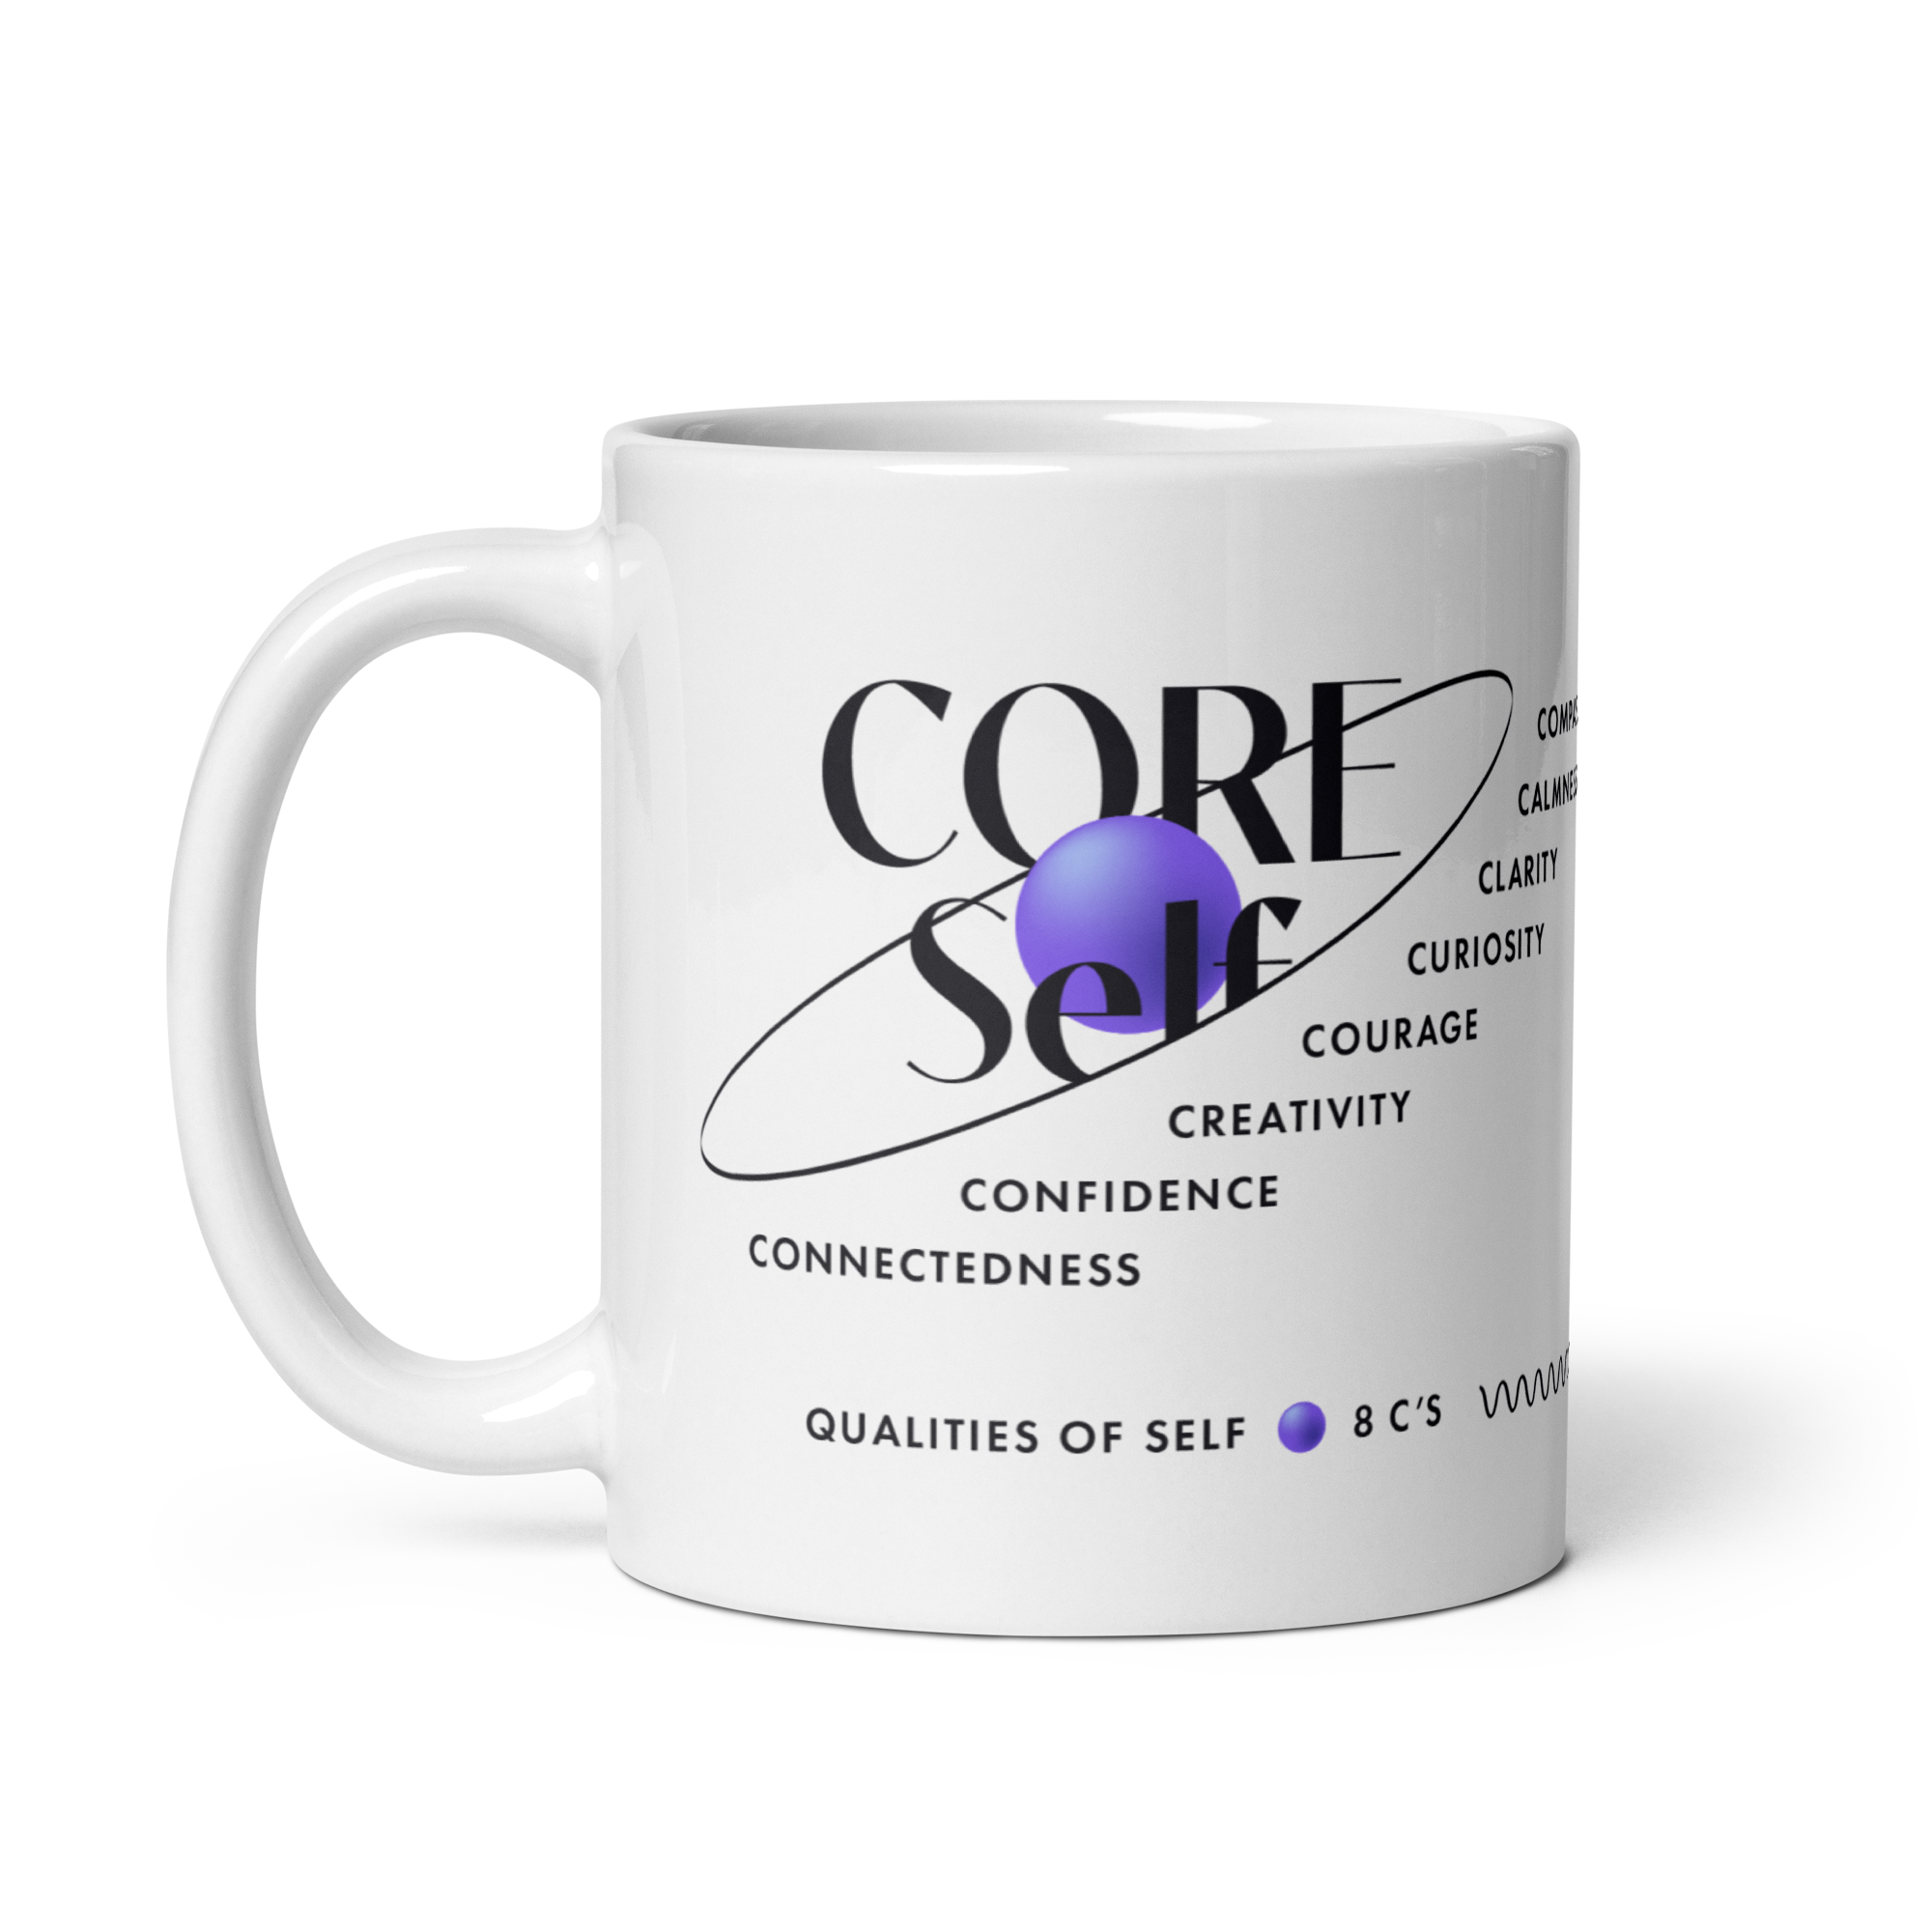 IFS Therapy Mug 8 Cs and 5 Ps of the Self